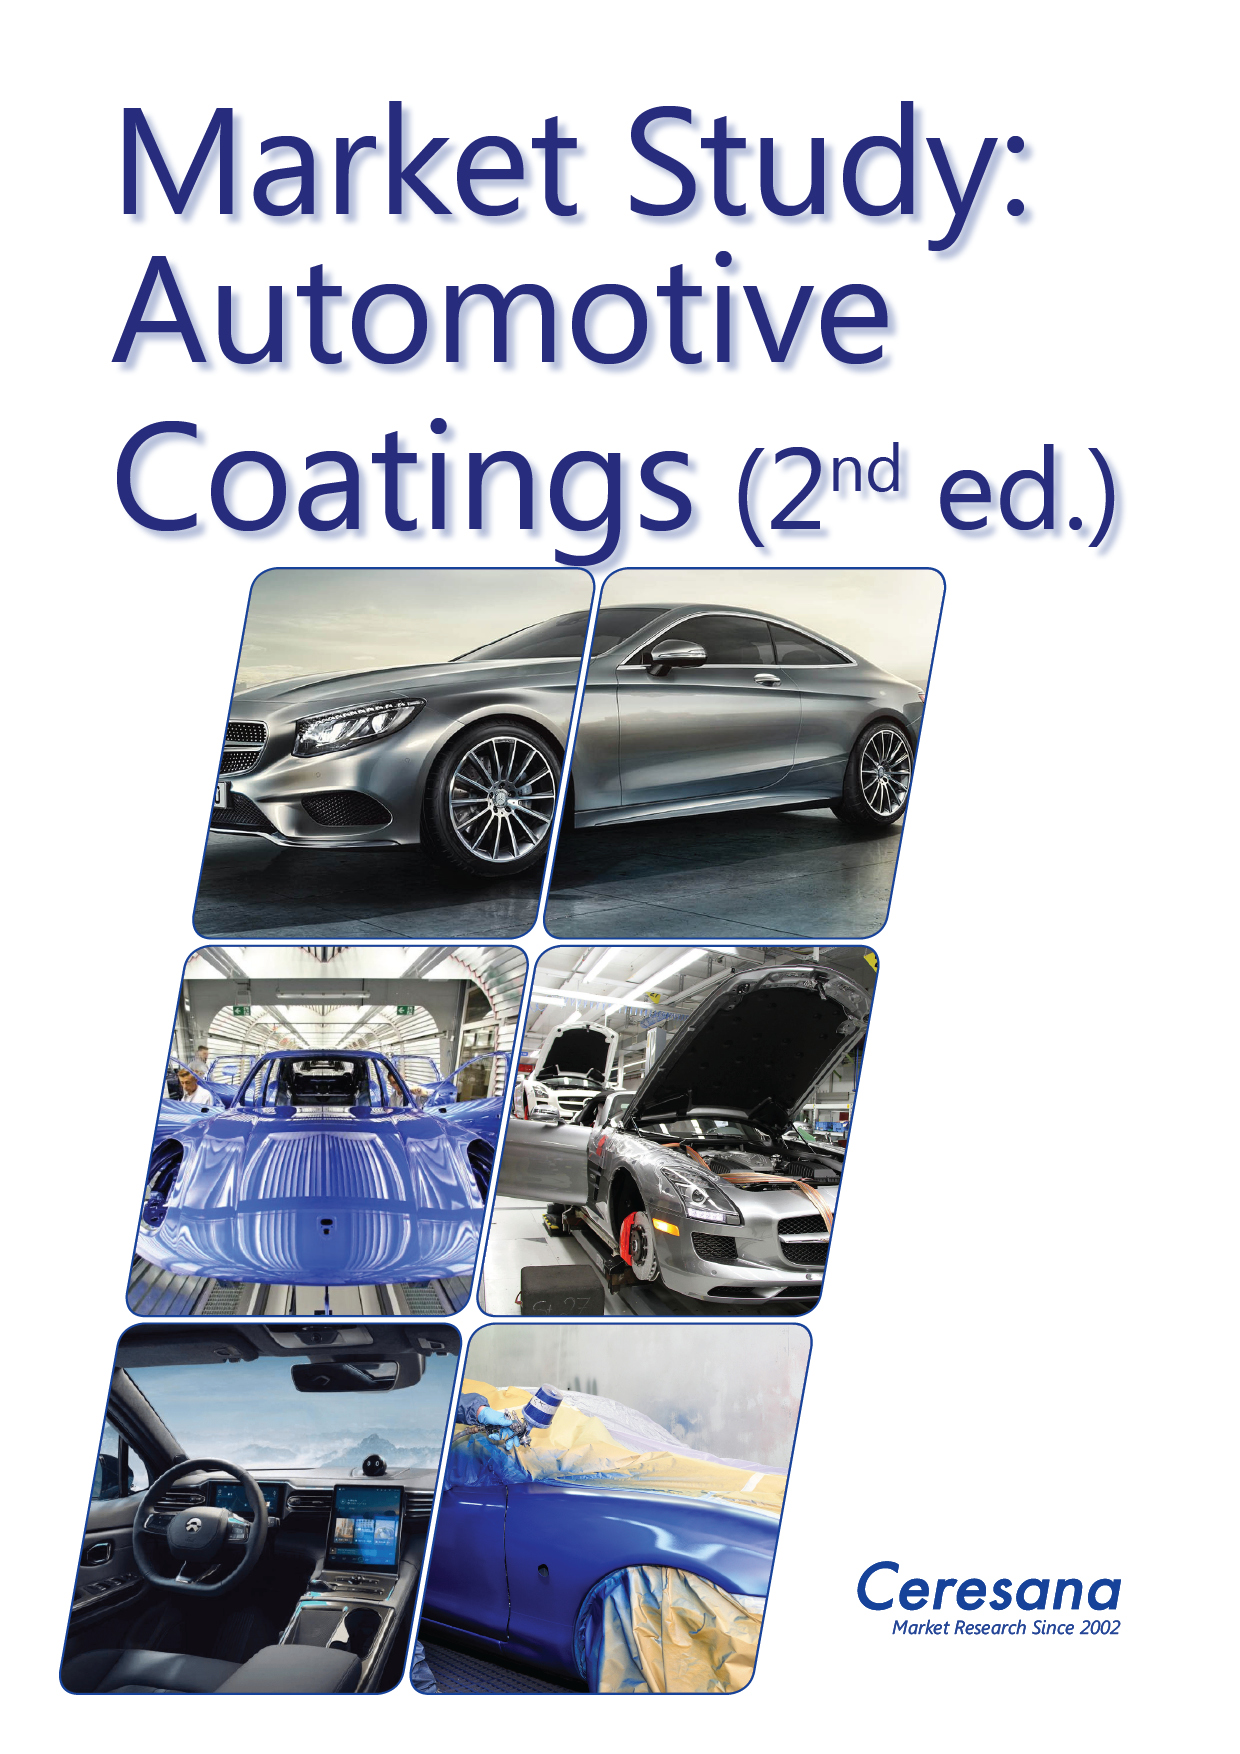 New start: Ceresana study on the market for coatings in the automotive industry